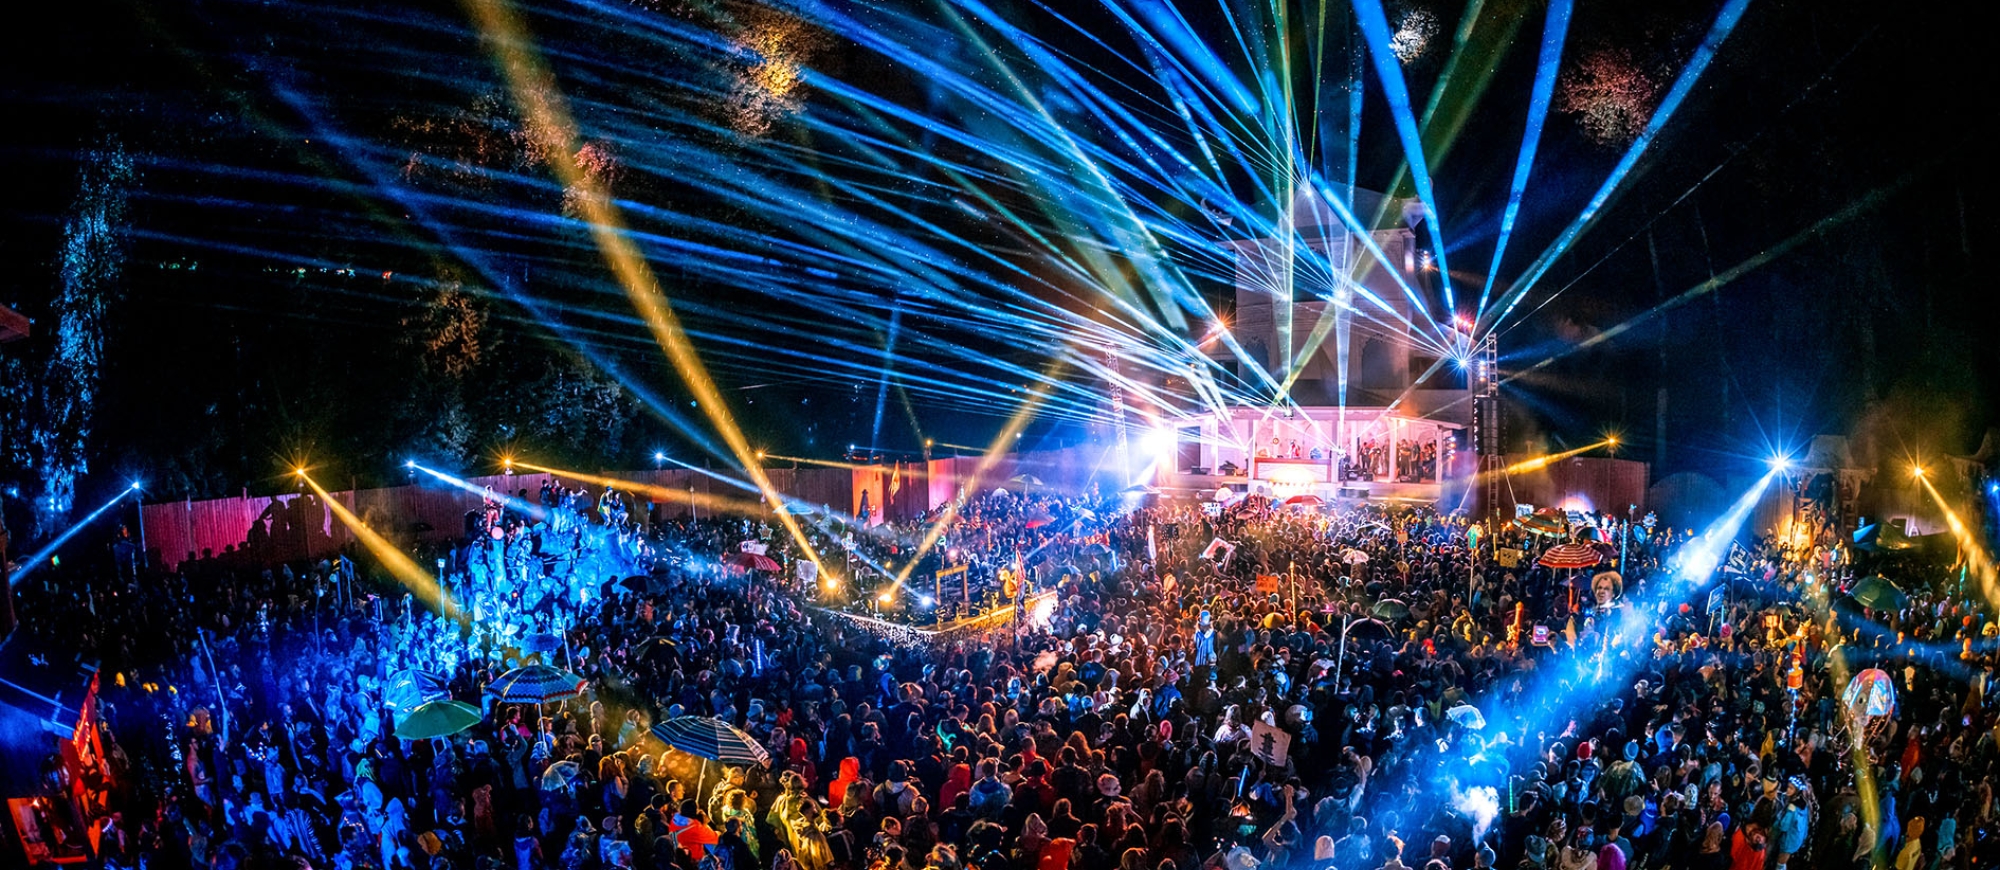 fans fill the dancefloor of the Pagoda Stage as it lights up with blue lazer lights at Shambhala Music Festival